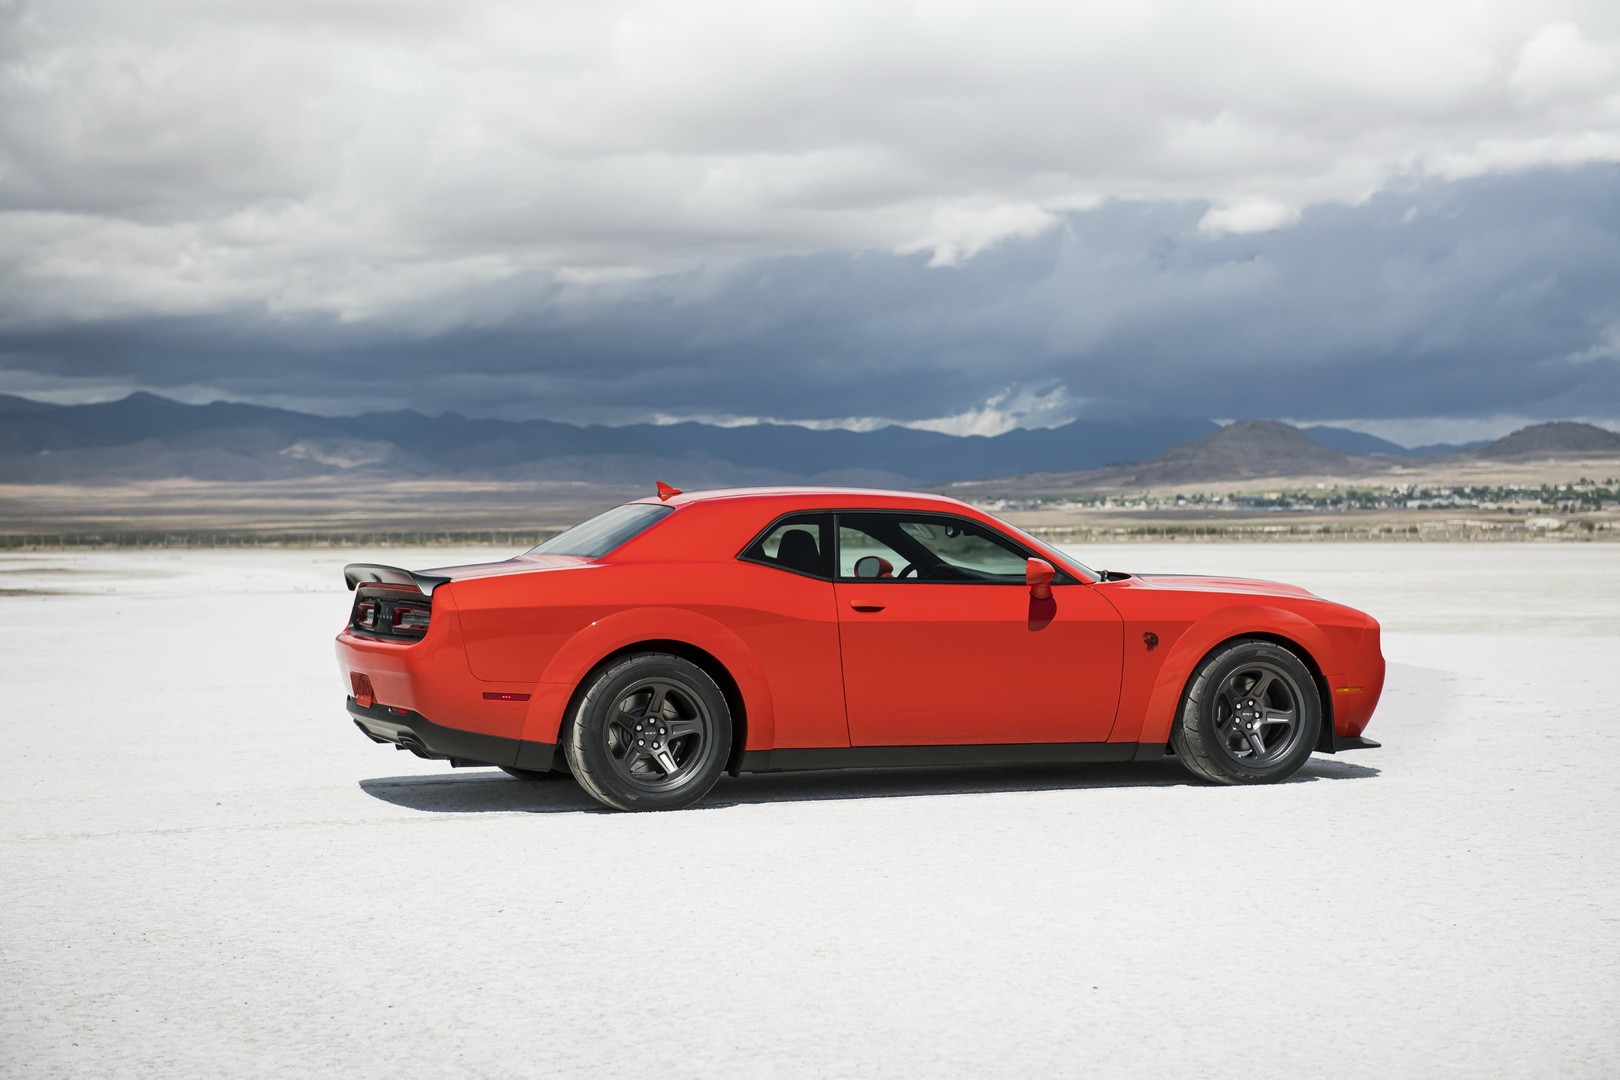 Dodge Electric Muscle Car Confirmed for 2024, Better Dust Off Those